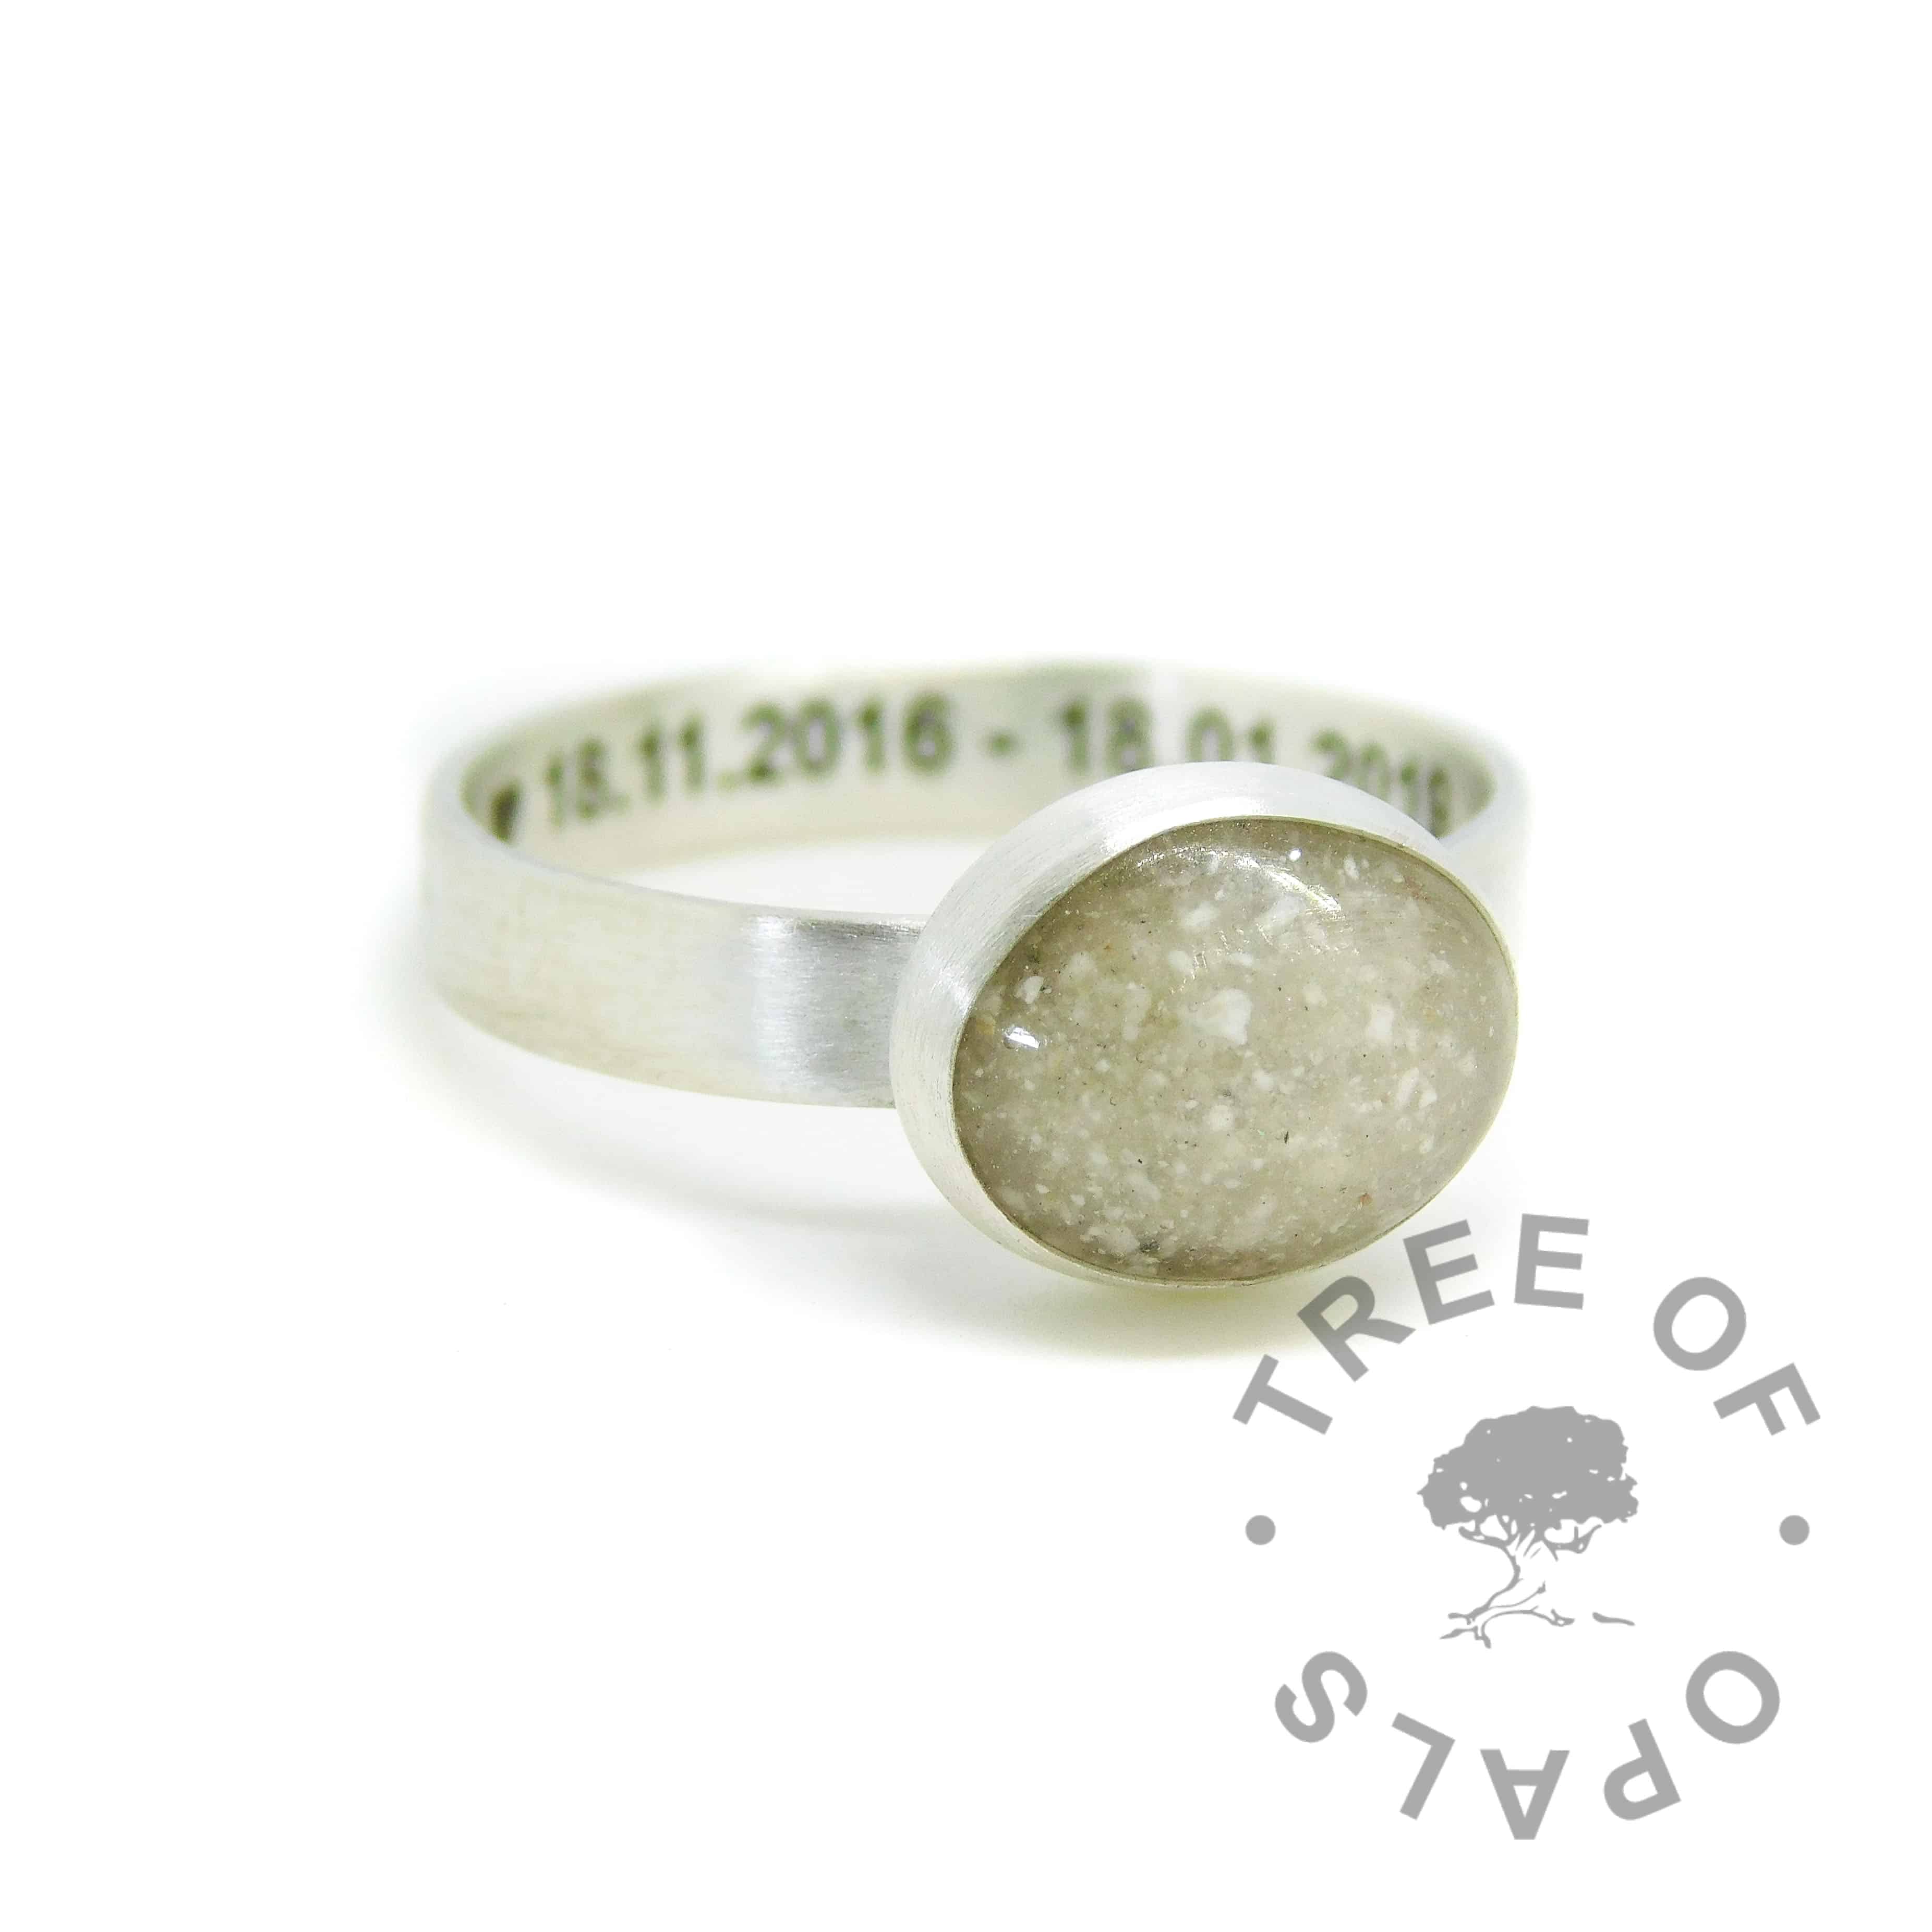 Engraved brushed band cremation ash ring with unicorn white sparkle mix. Engraved inside in Arial font and hearts.  Handmade solid sterling silver memorial ring